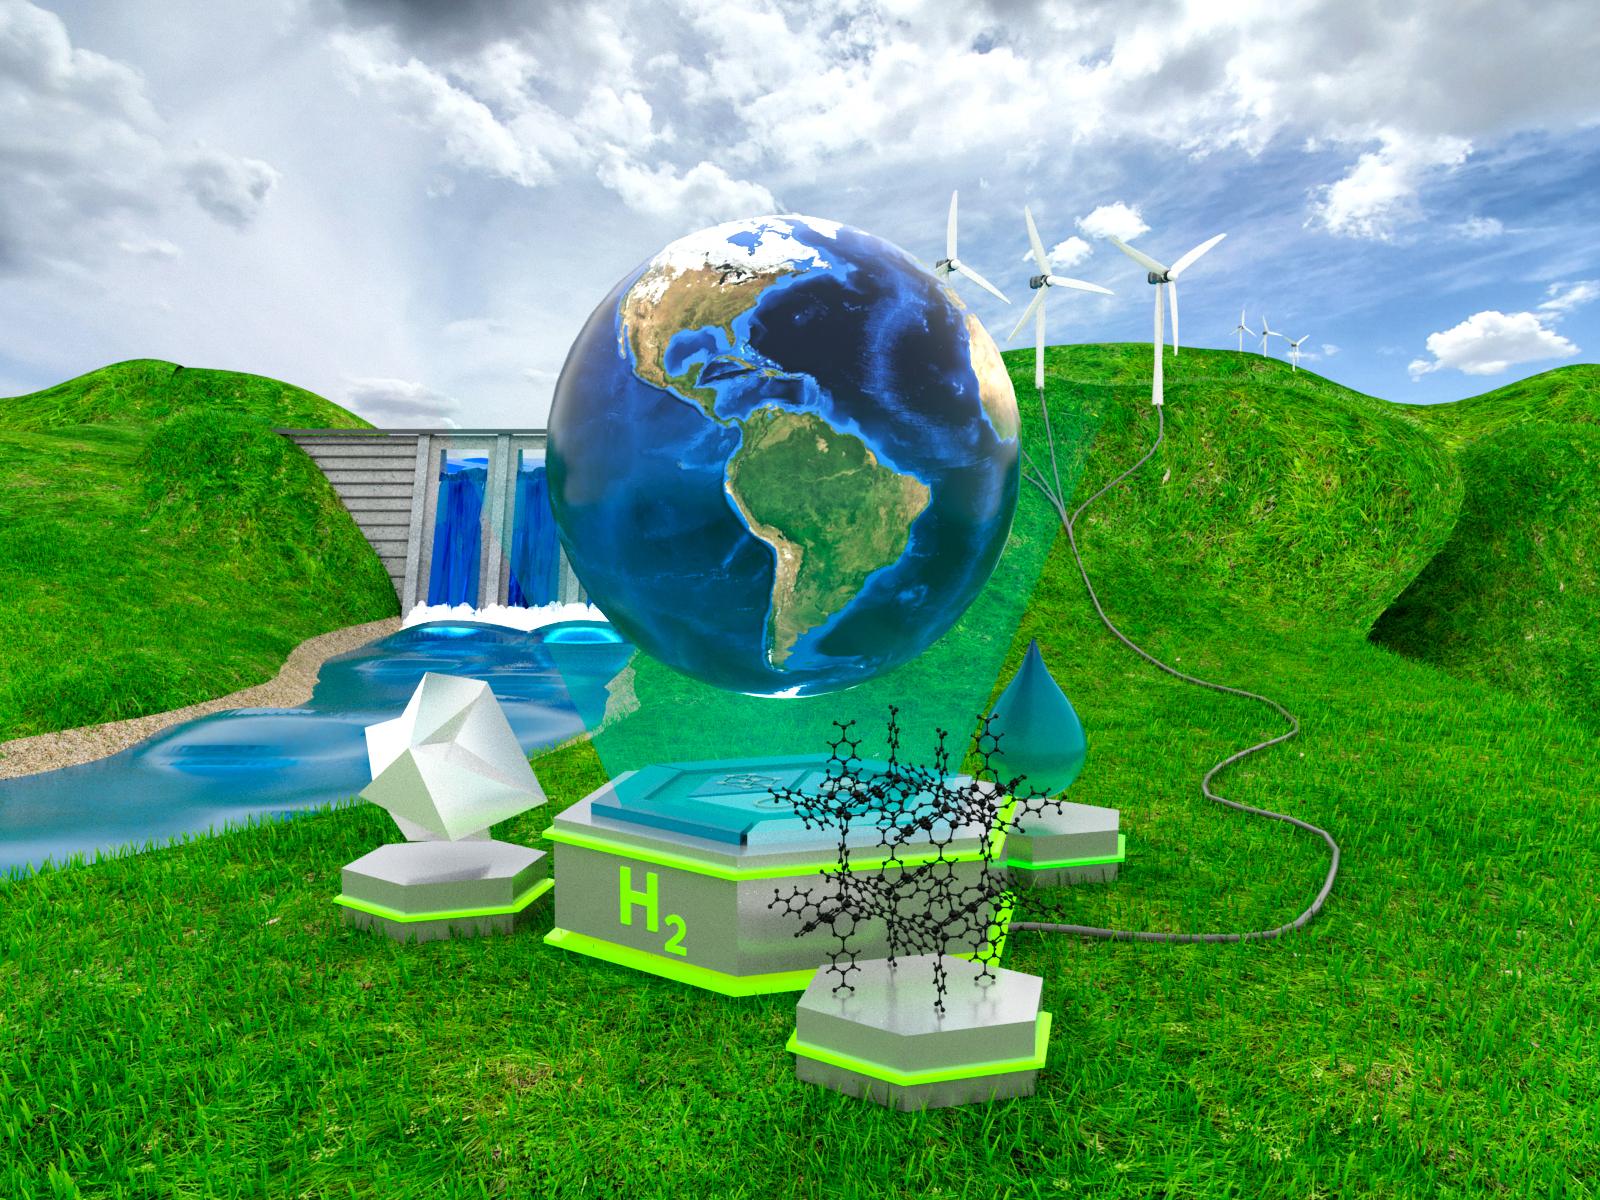 A globe floats in the center of the image, surrounded by different forms of hydrogen energy storage materials.